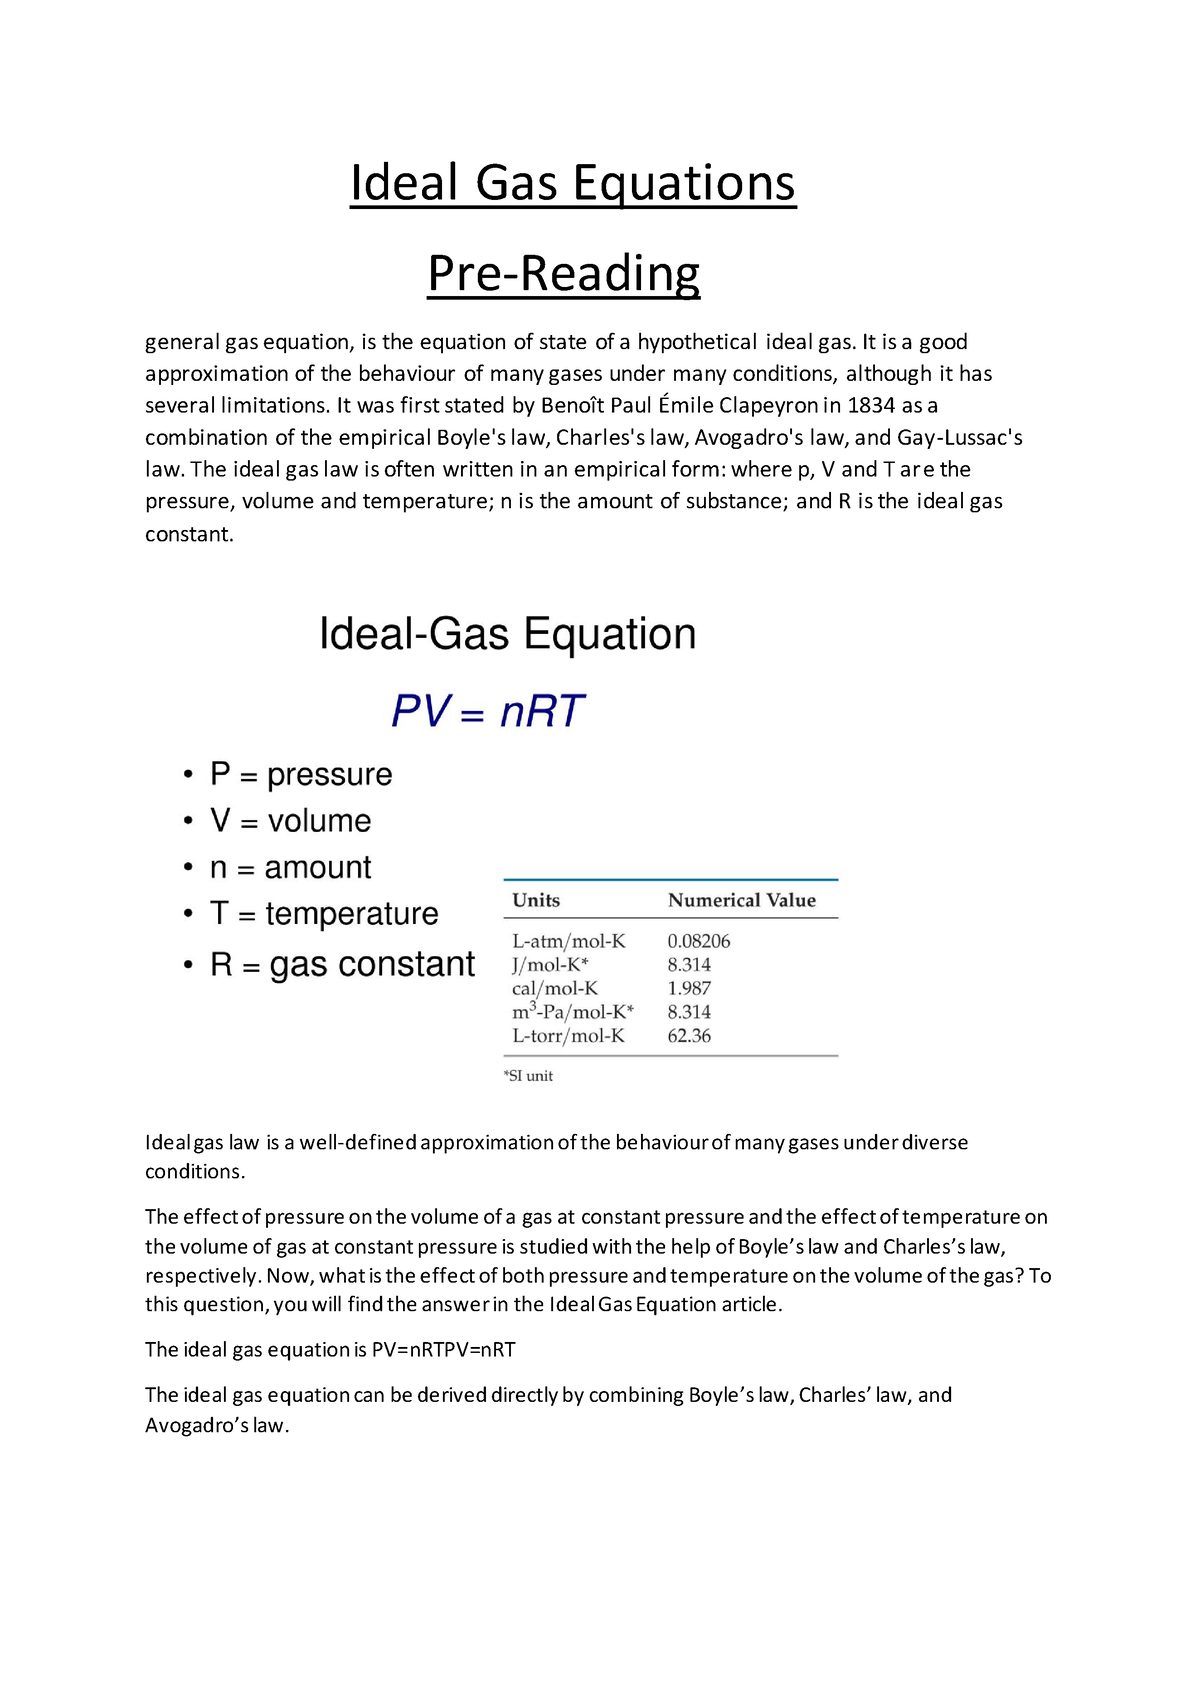 6.5.3 Ideal Gas Equation, AQA A Level Physics Revision Notes 2017